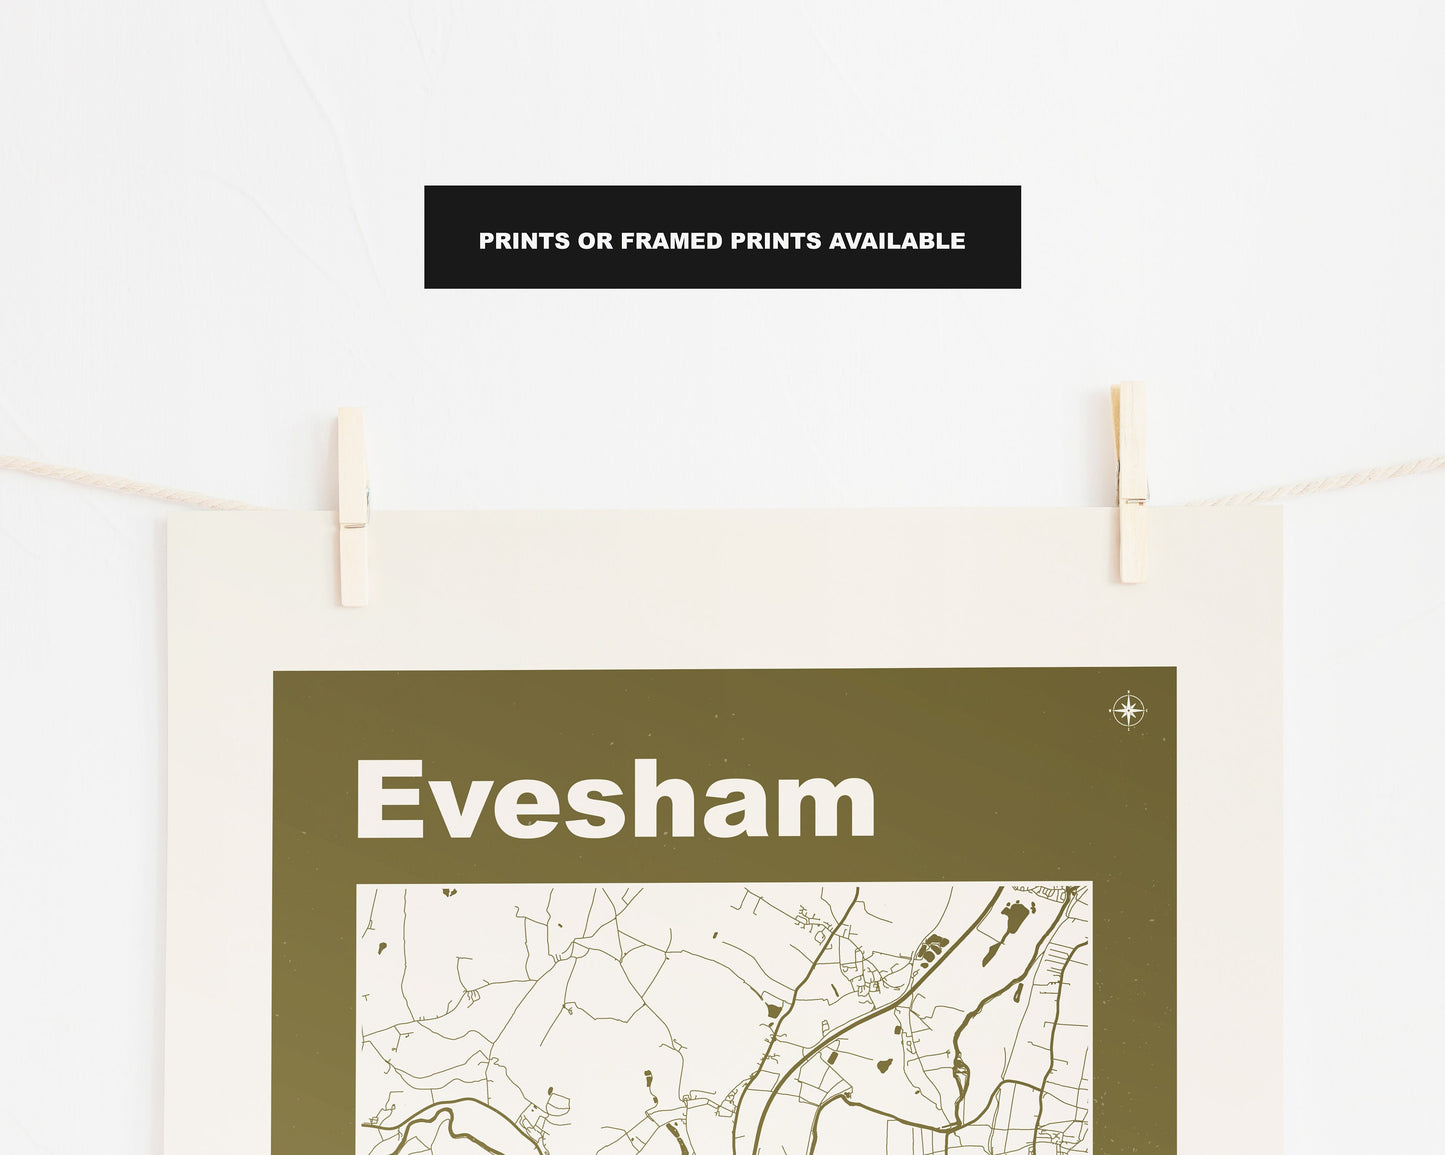 Evesham Print - Map Print - Mid Century Modern  - Retro - Vintage - Contemporary - Evesham Print - Map - Map Poster - Gift - Cotswolds